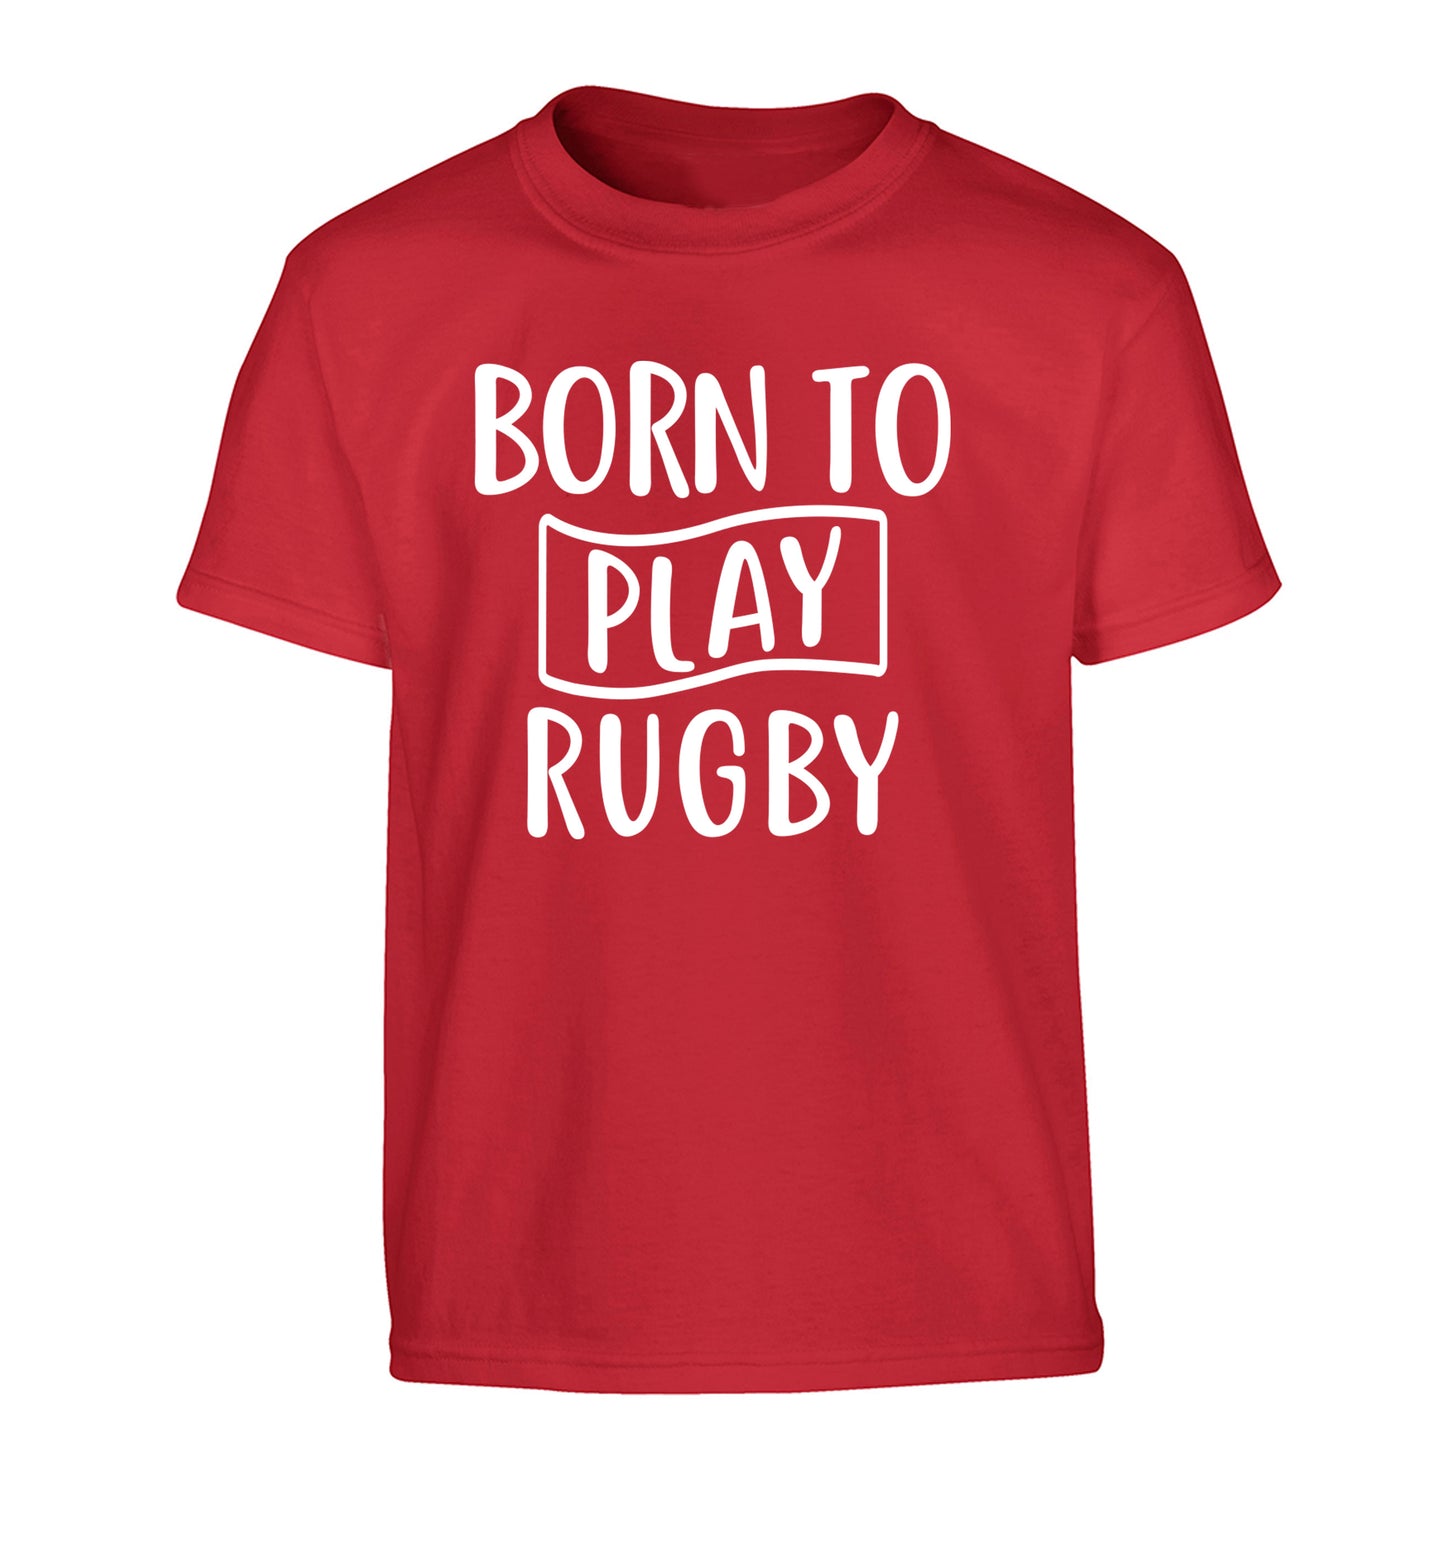 Born to play rugby Children's red Tshirt 12-13 Years